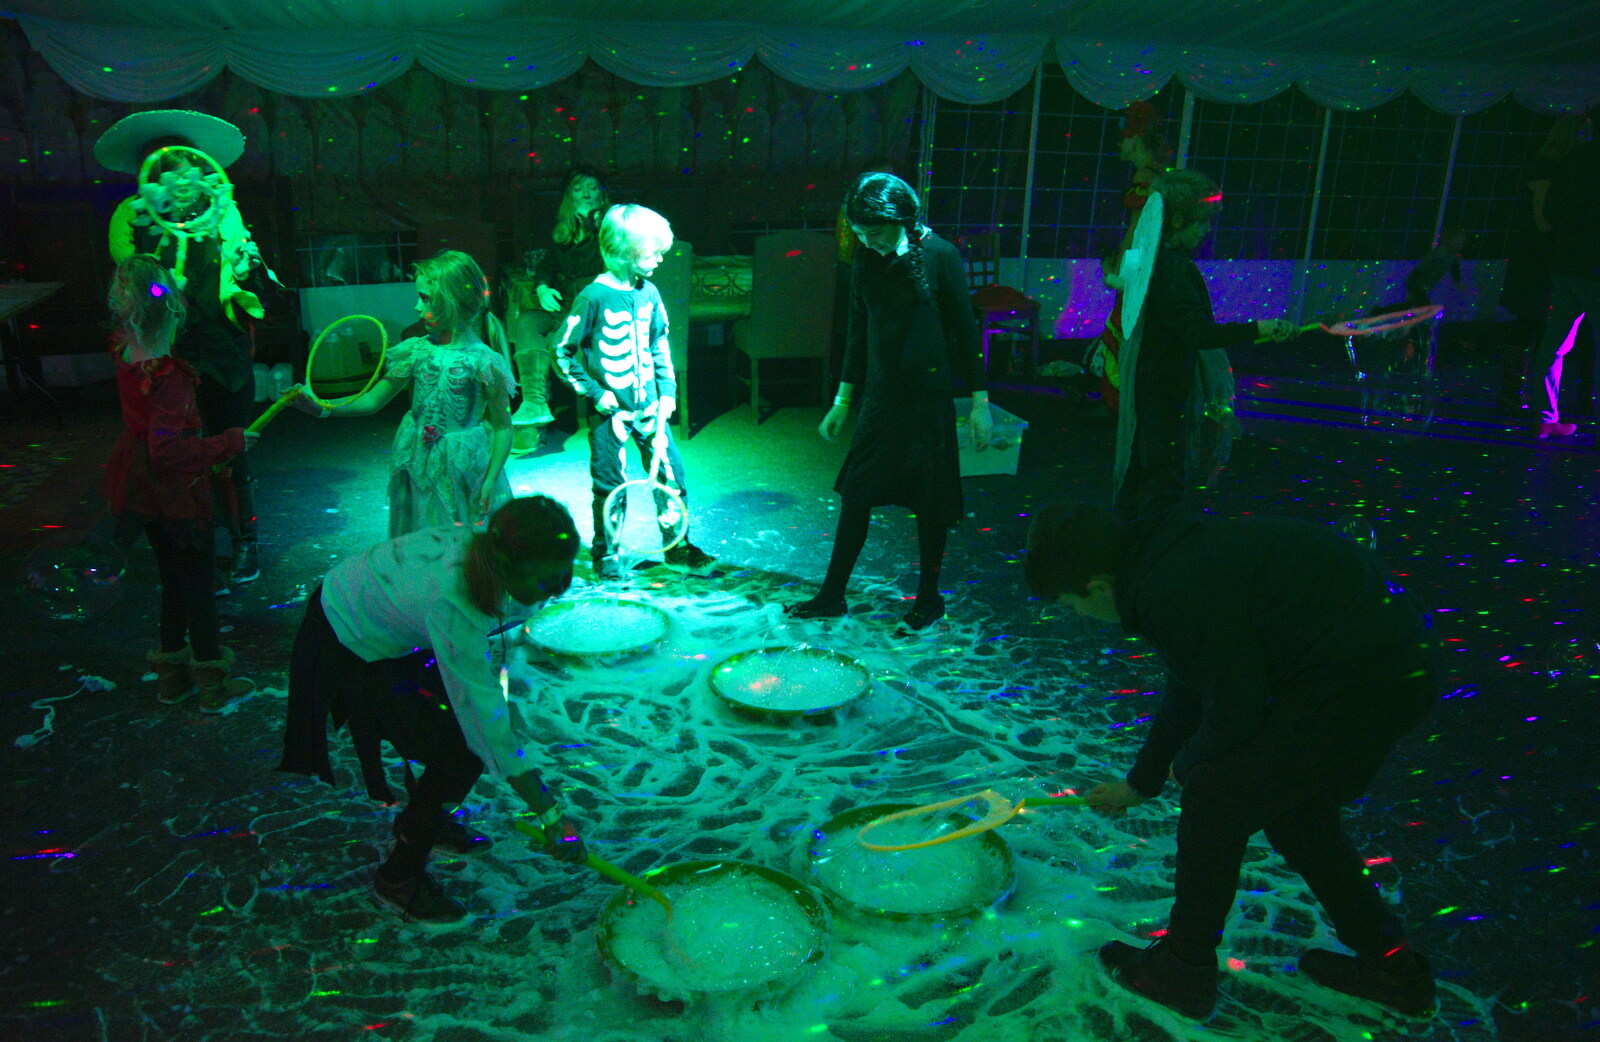 The bubble solution is all over the floor from Day of the Dead Party at the Oaksmere, Brome, Suffolk - 2nd November 2019